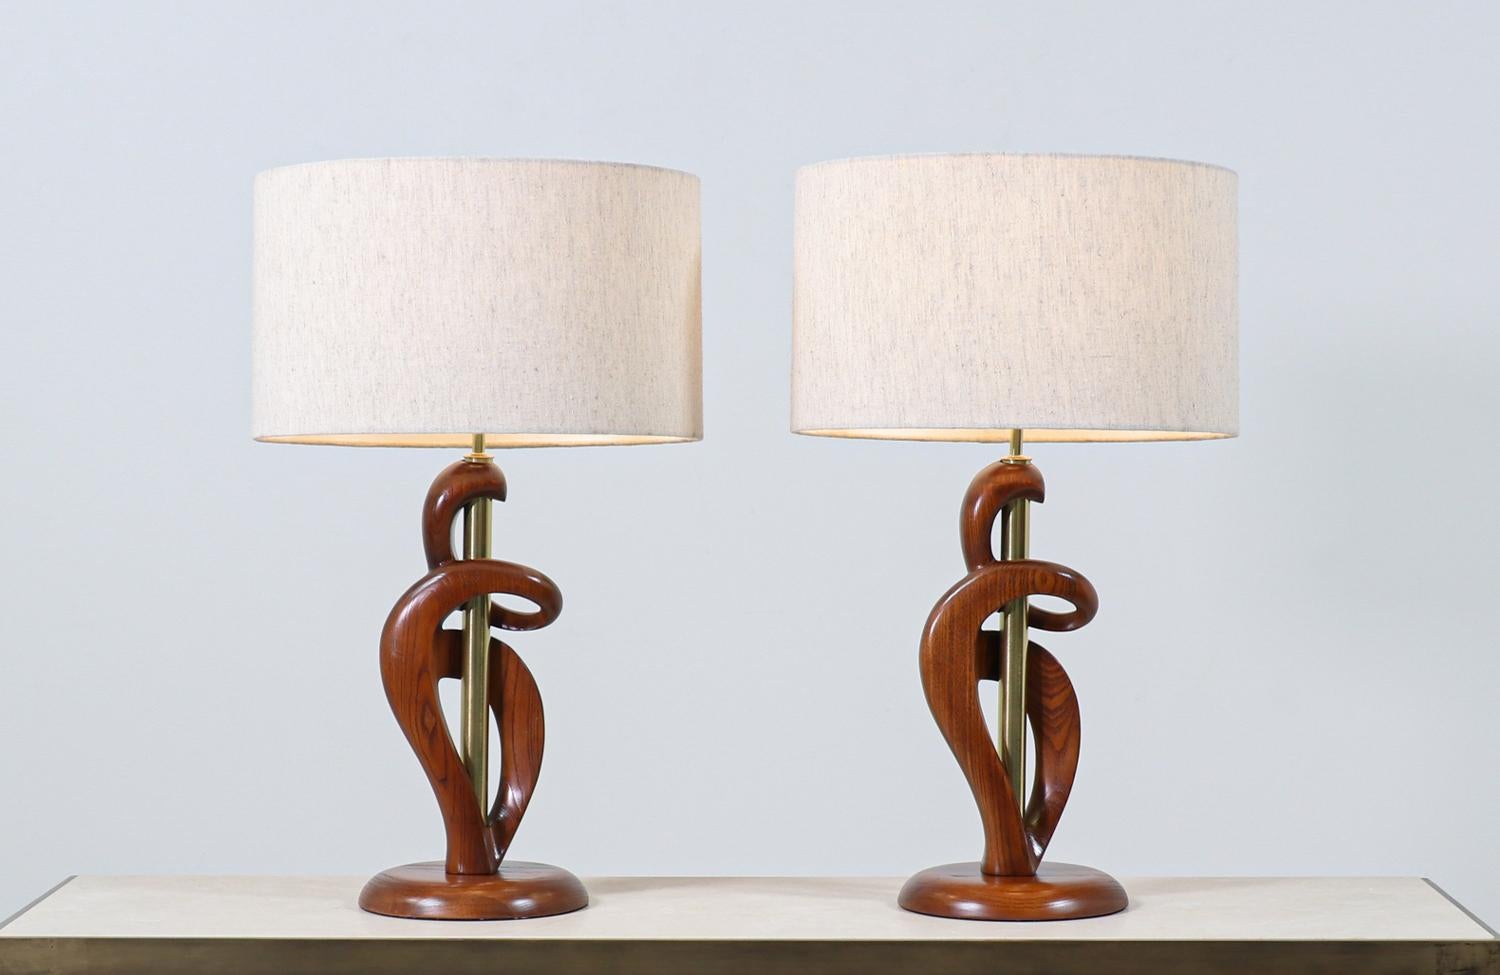 Designer: Lighthouse Light & Shade Co.
Manufacturer: Lighthouse Light & Shade Co.

Dimensions
28in H x 9in W x 9in D 
Lamp Shade: 12in H x 17in W.

________________________________________

Transforming a piece of Mid-Century Modern furniture is